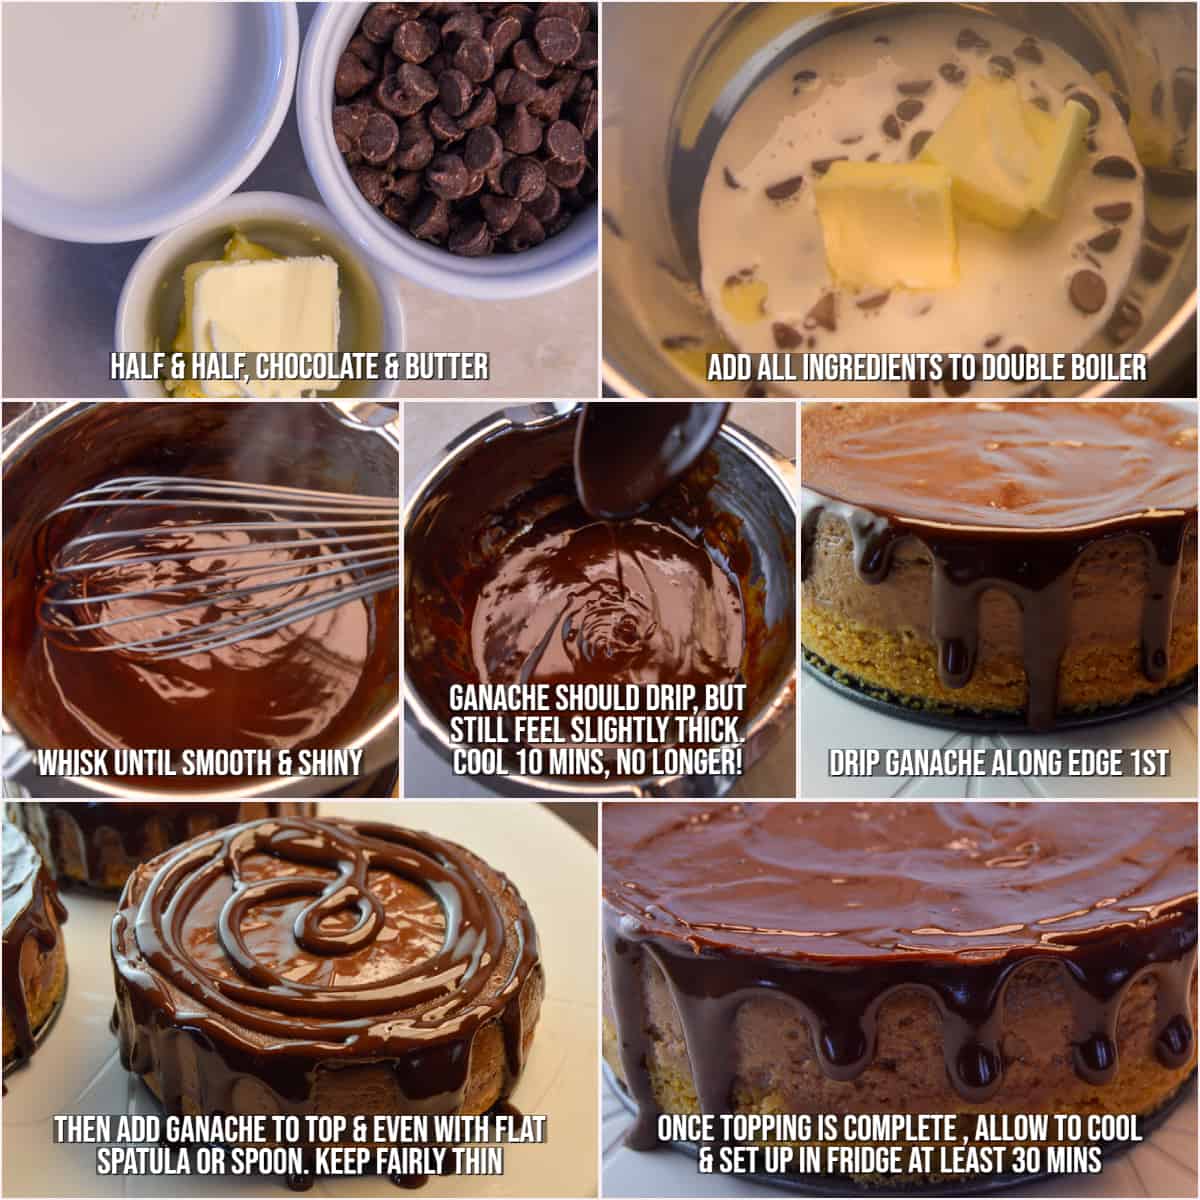 Steps showing how to make Chocolate ganache topping